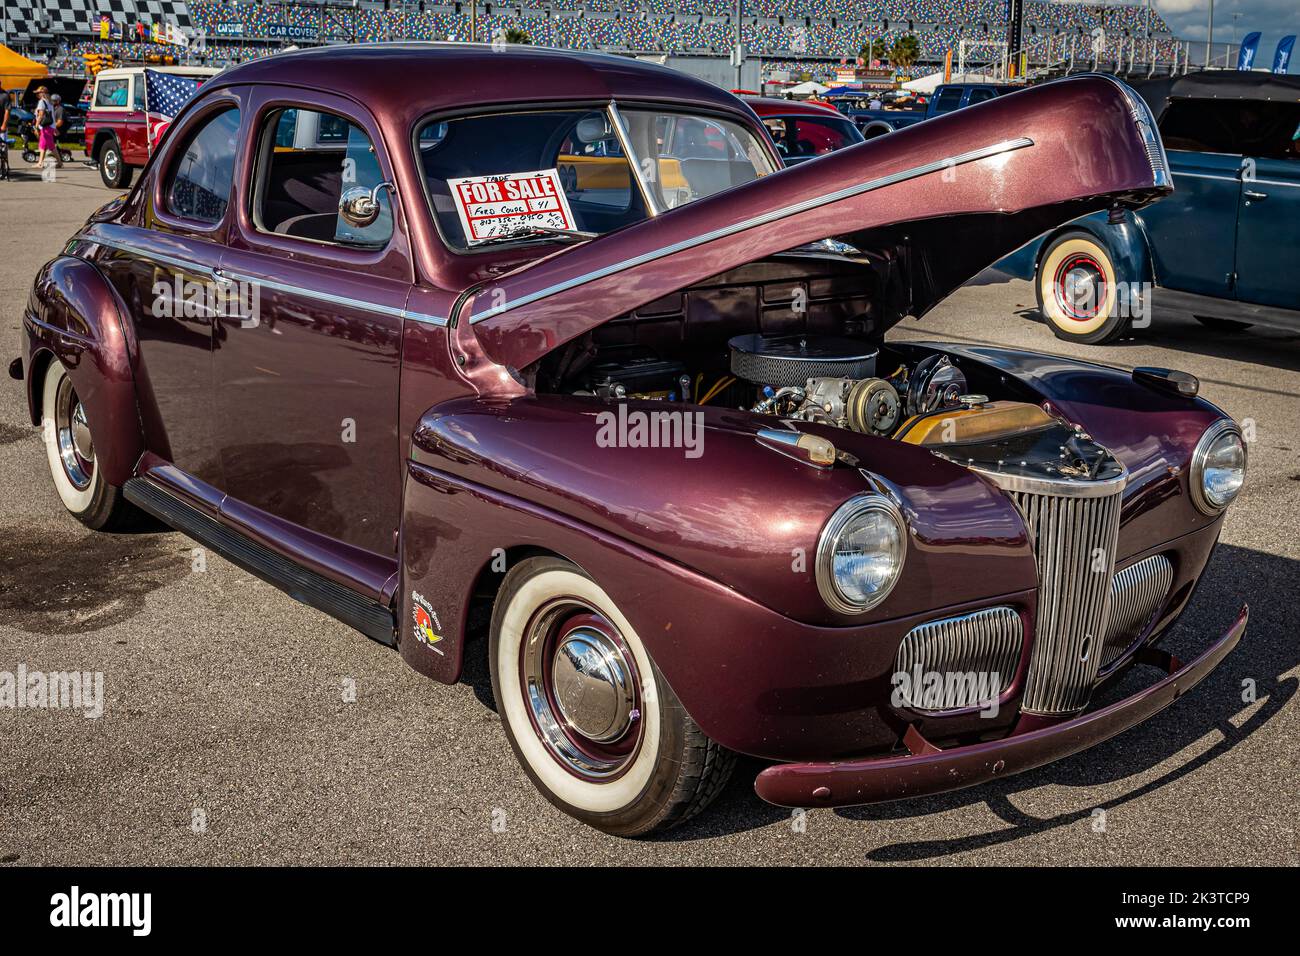 Daytona Beach, FL - November 28, 2020: High perspective front corner view of a 1941 Ford Deluxe Business Coupe at a local car show. Stock Photo